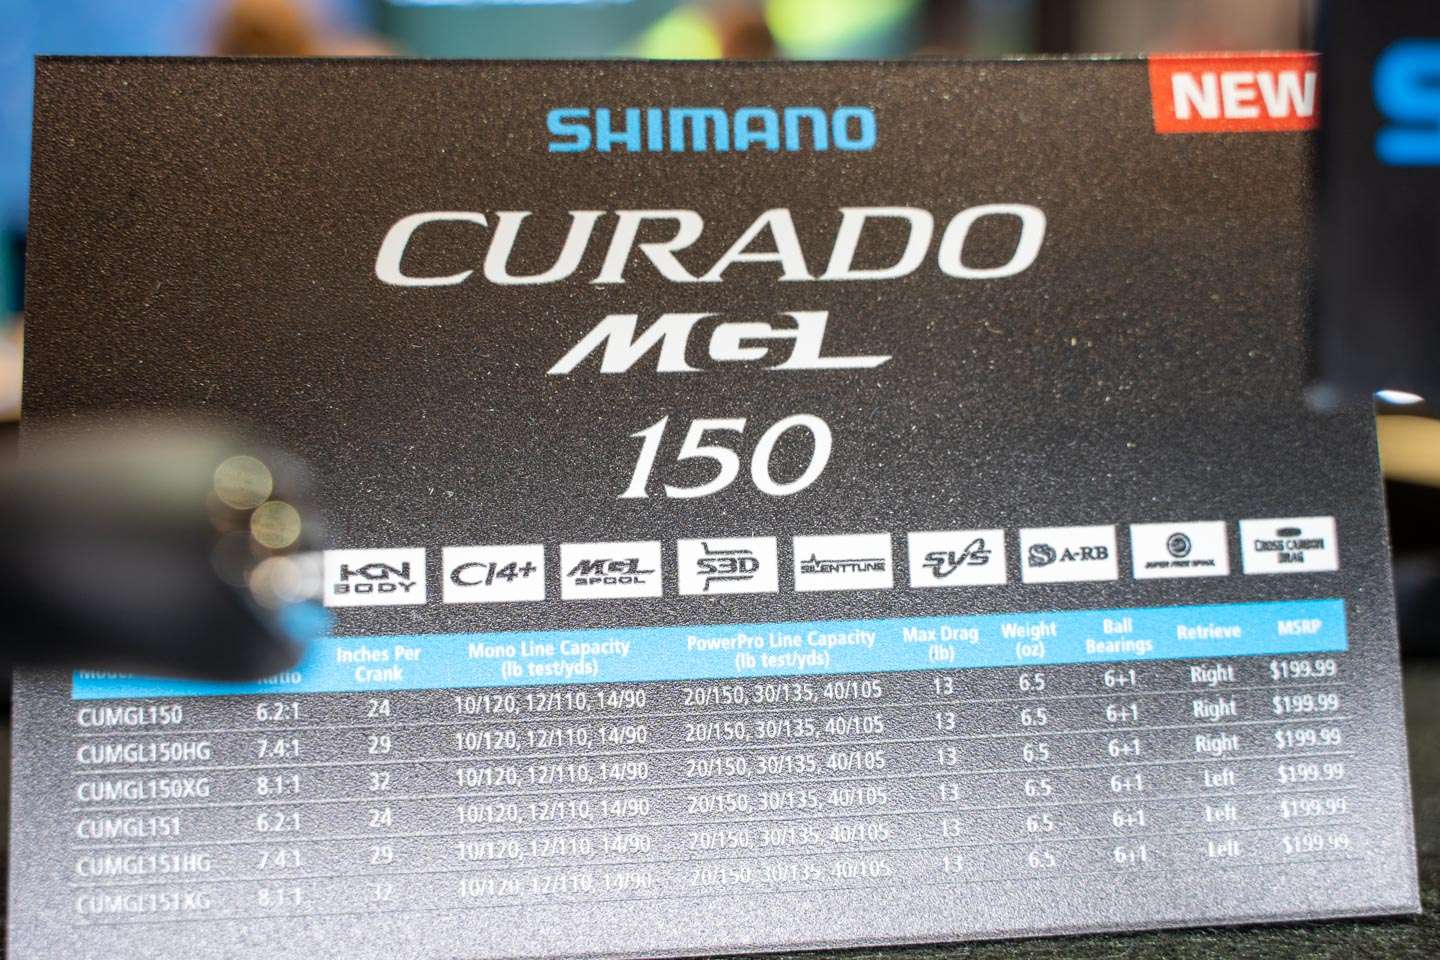 <b>Shimano Curado 150 MGL Casting Reel</b><br>
The Shimano Curado has long been one of the most popular reels on the market. Shimano developed the new 150 as a perfect in-between size of their already existing 70, 200 and 300 size Curados. 